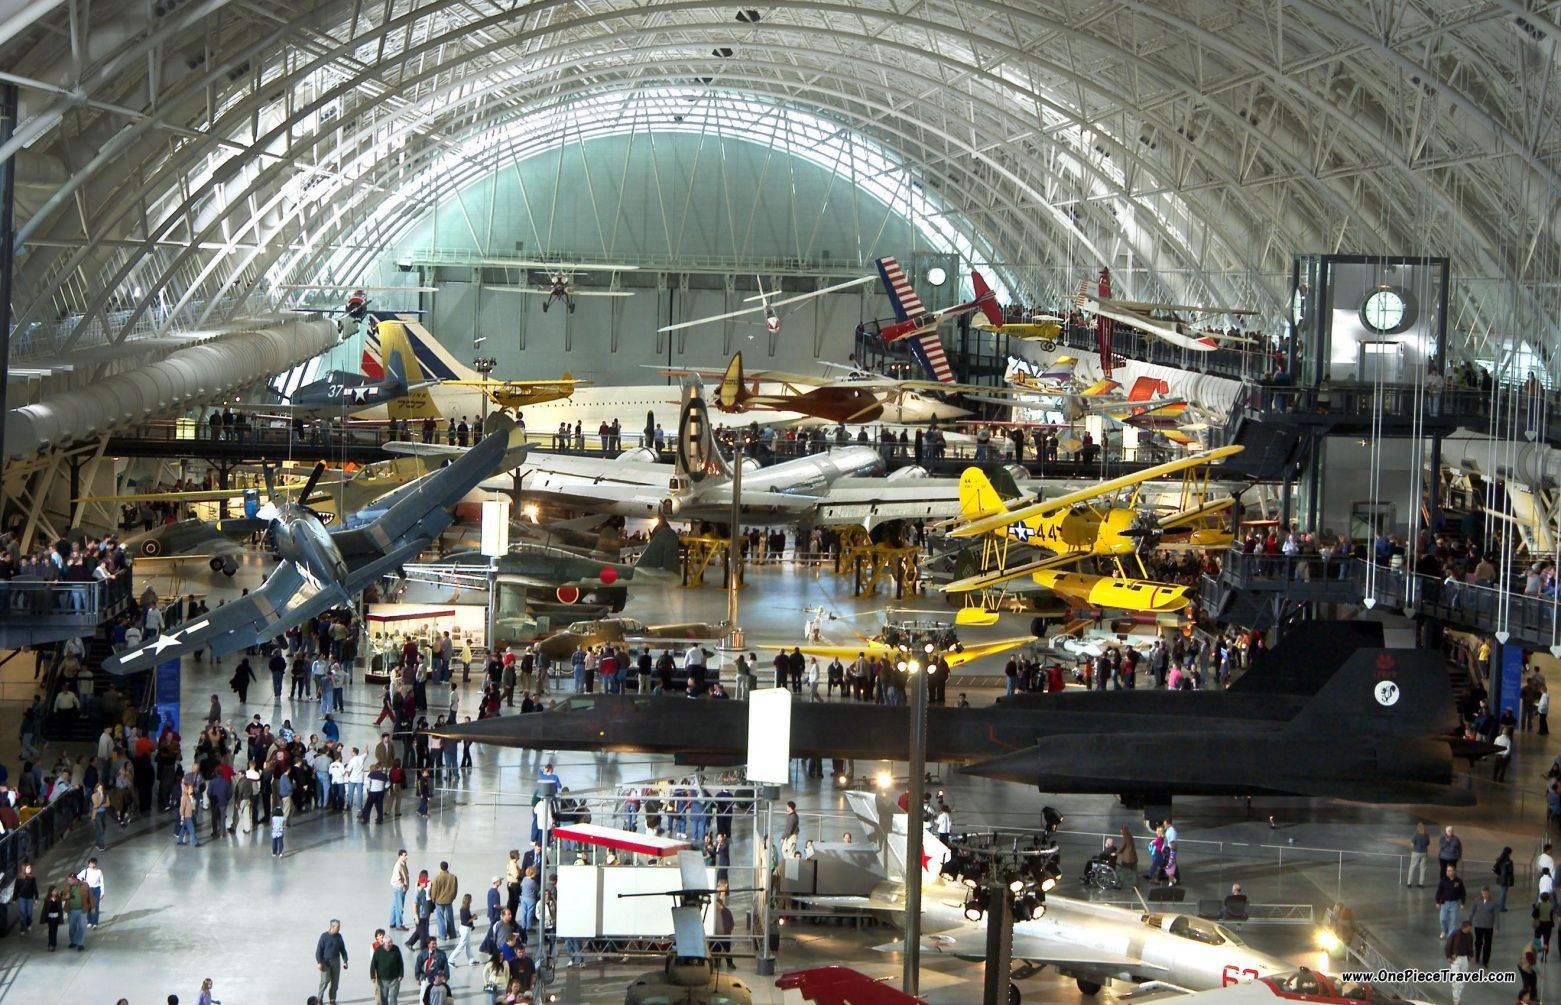 /assets/contentimages/National_Air_and_Space_Museum_in_Washington.jpg